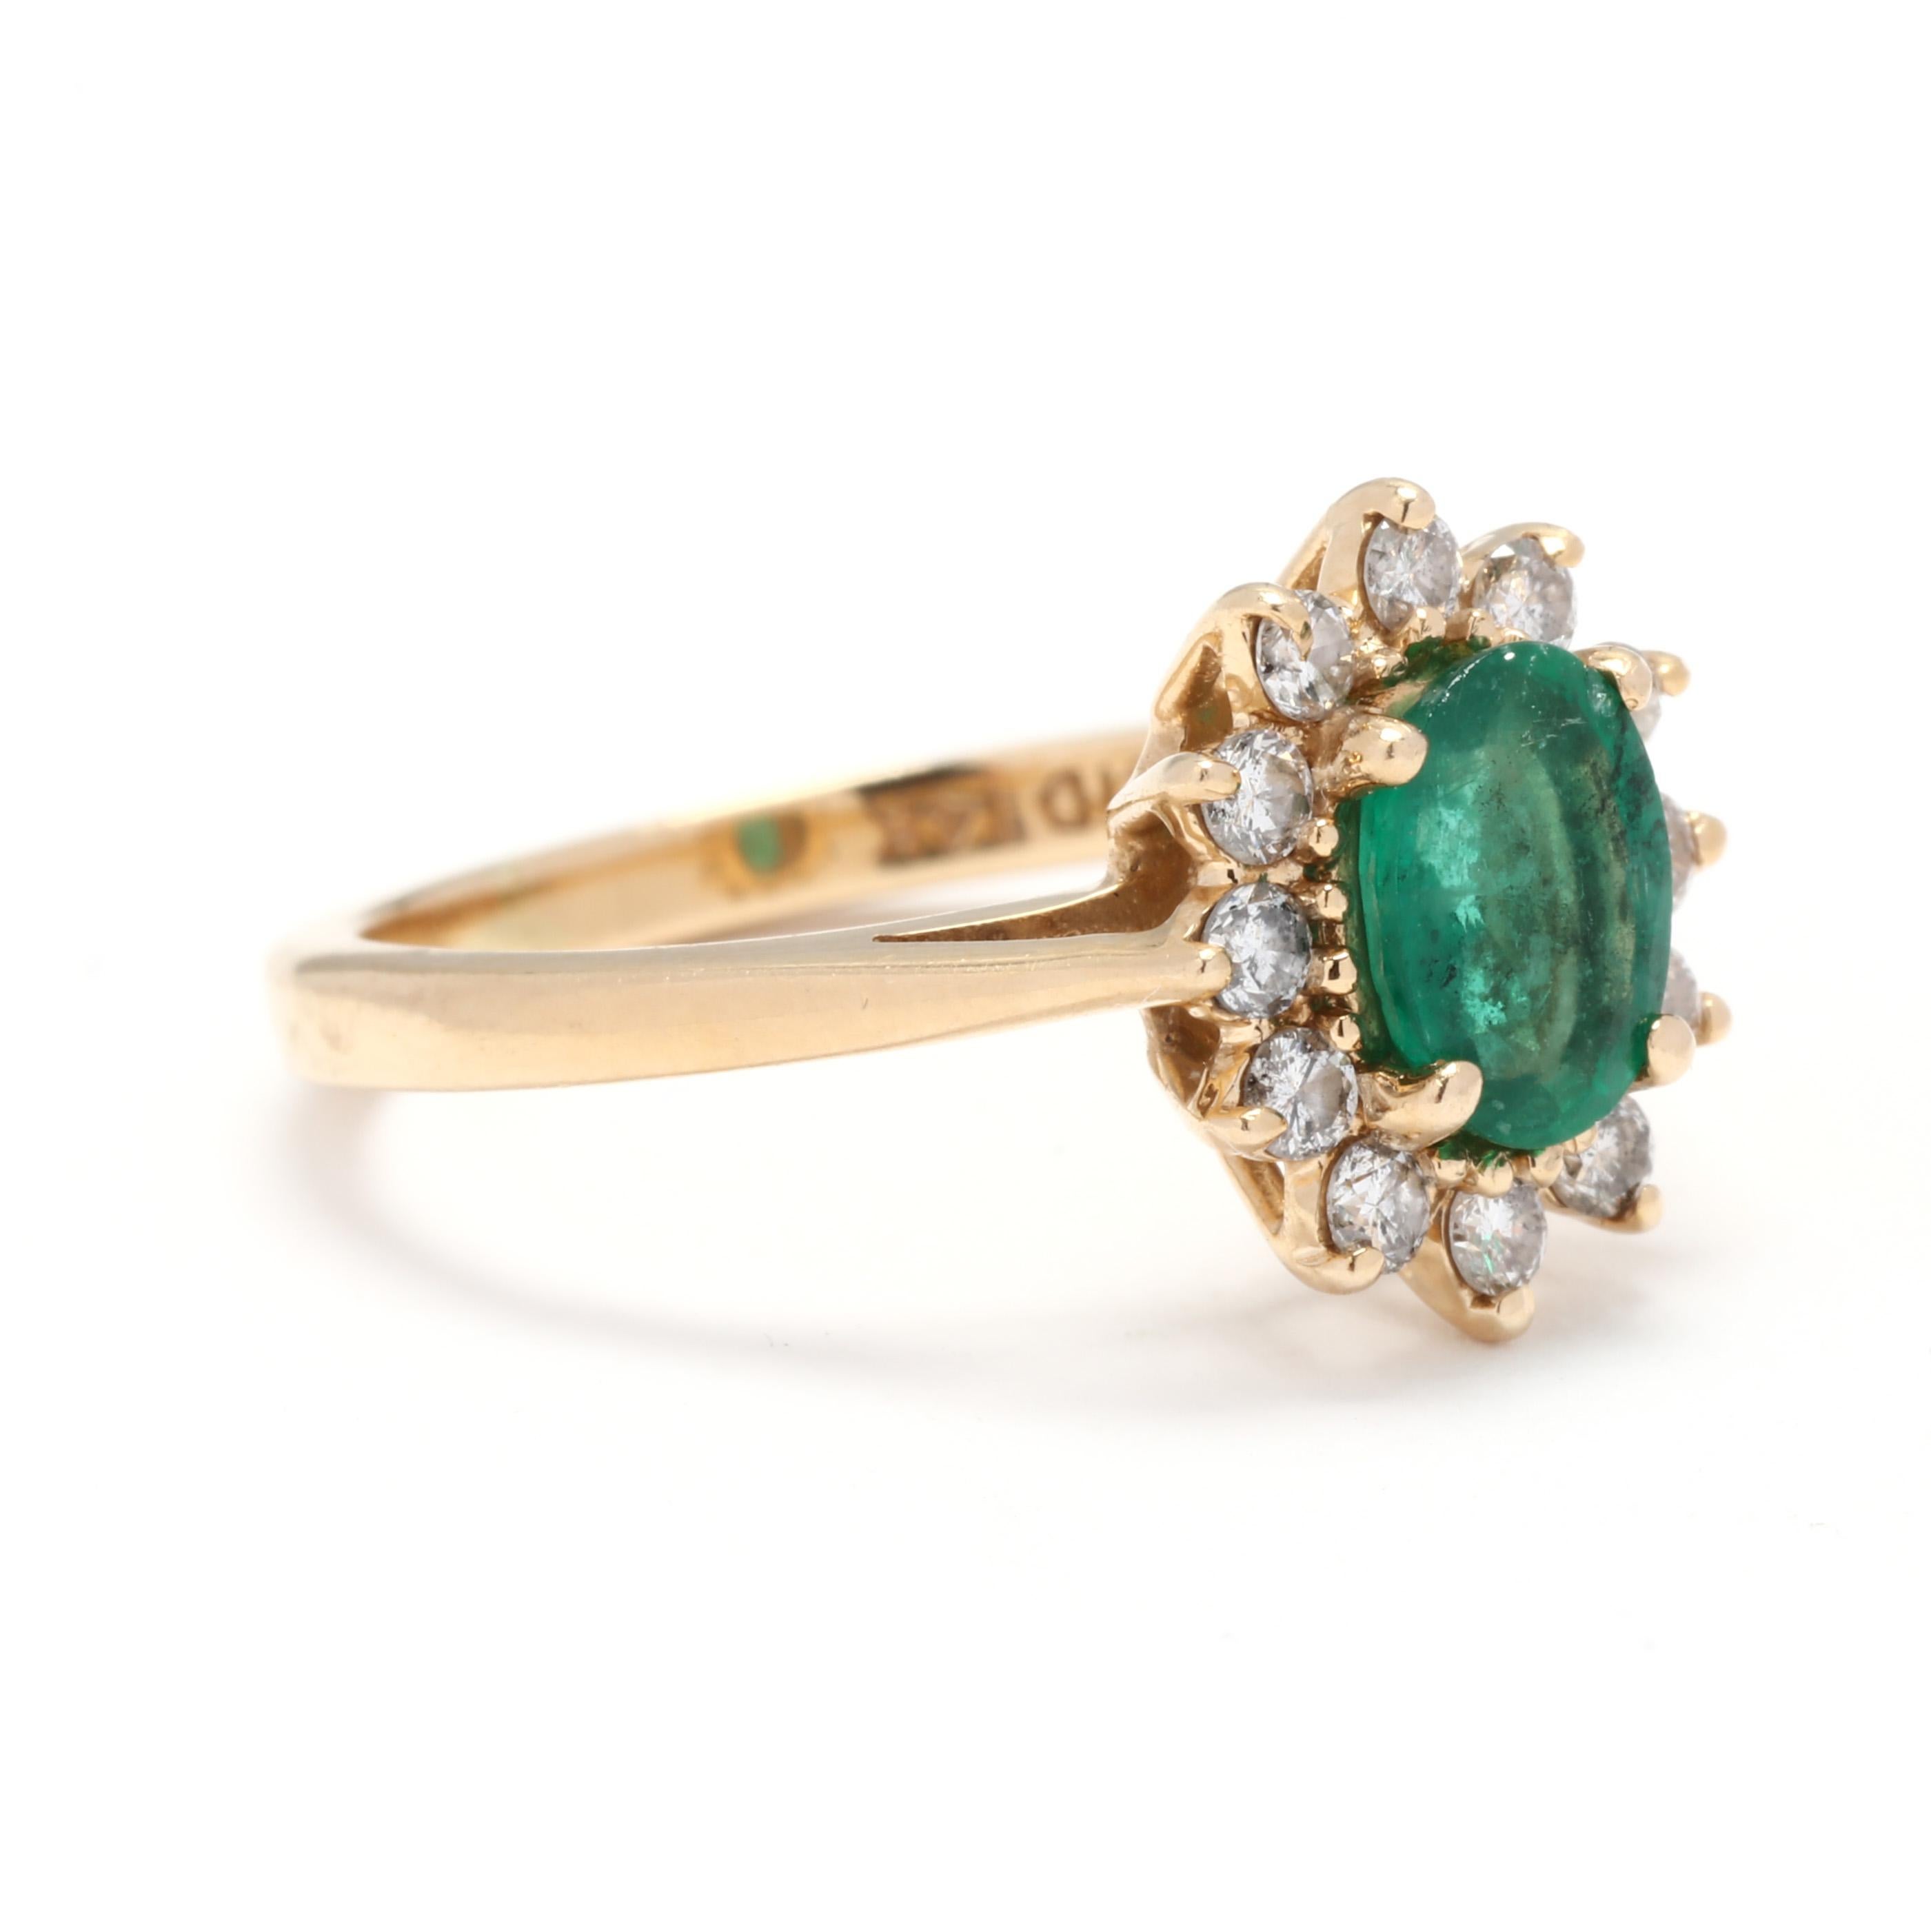 A vintage 14 karat yellow gold emerald and diamond halo ring. This right hand ring features a prong set, oval cut emerald weighing approximately .80 carat surrounded by a halo of round brilliant cut diamonds weighing approximately .25 total carats